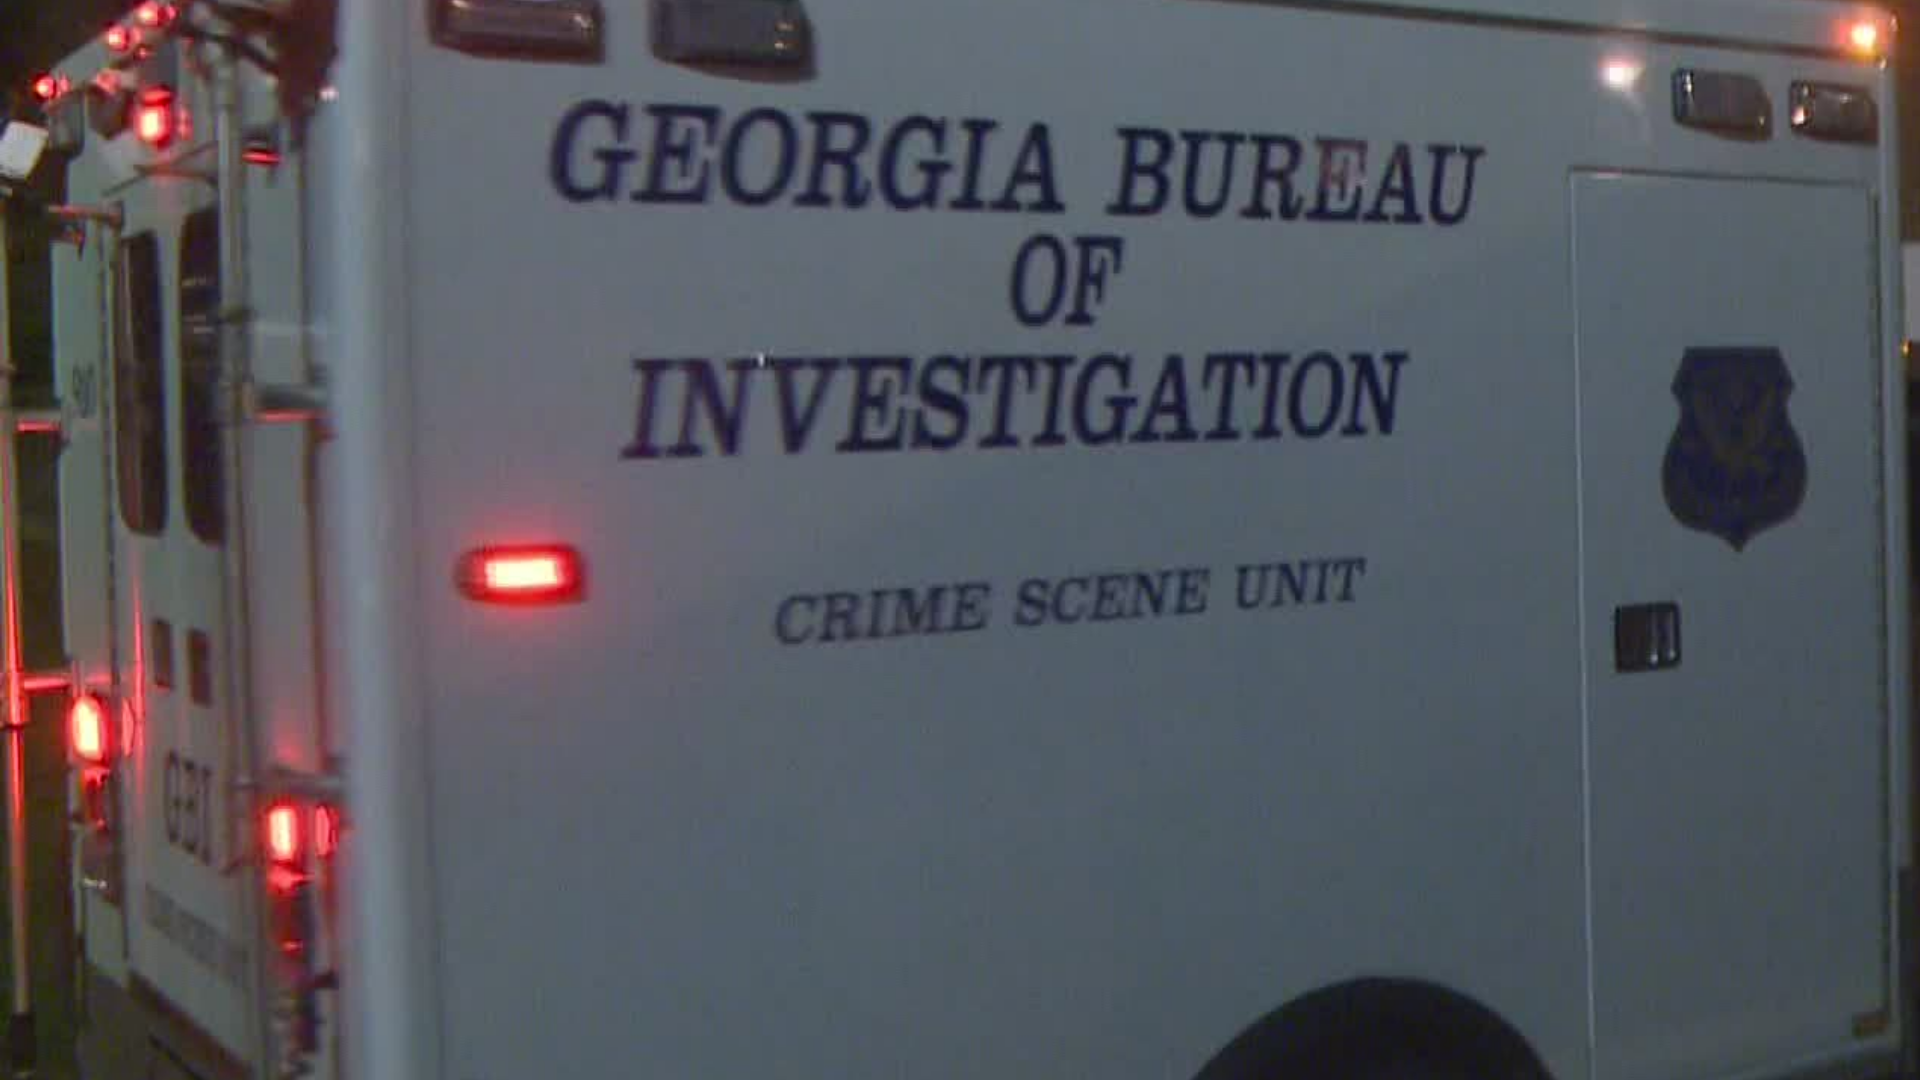 When an officer involved shooting happens, the GBI is usually one of the first agencies called in to investigate.